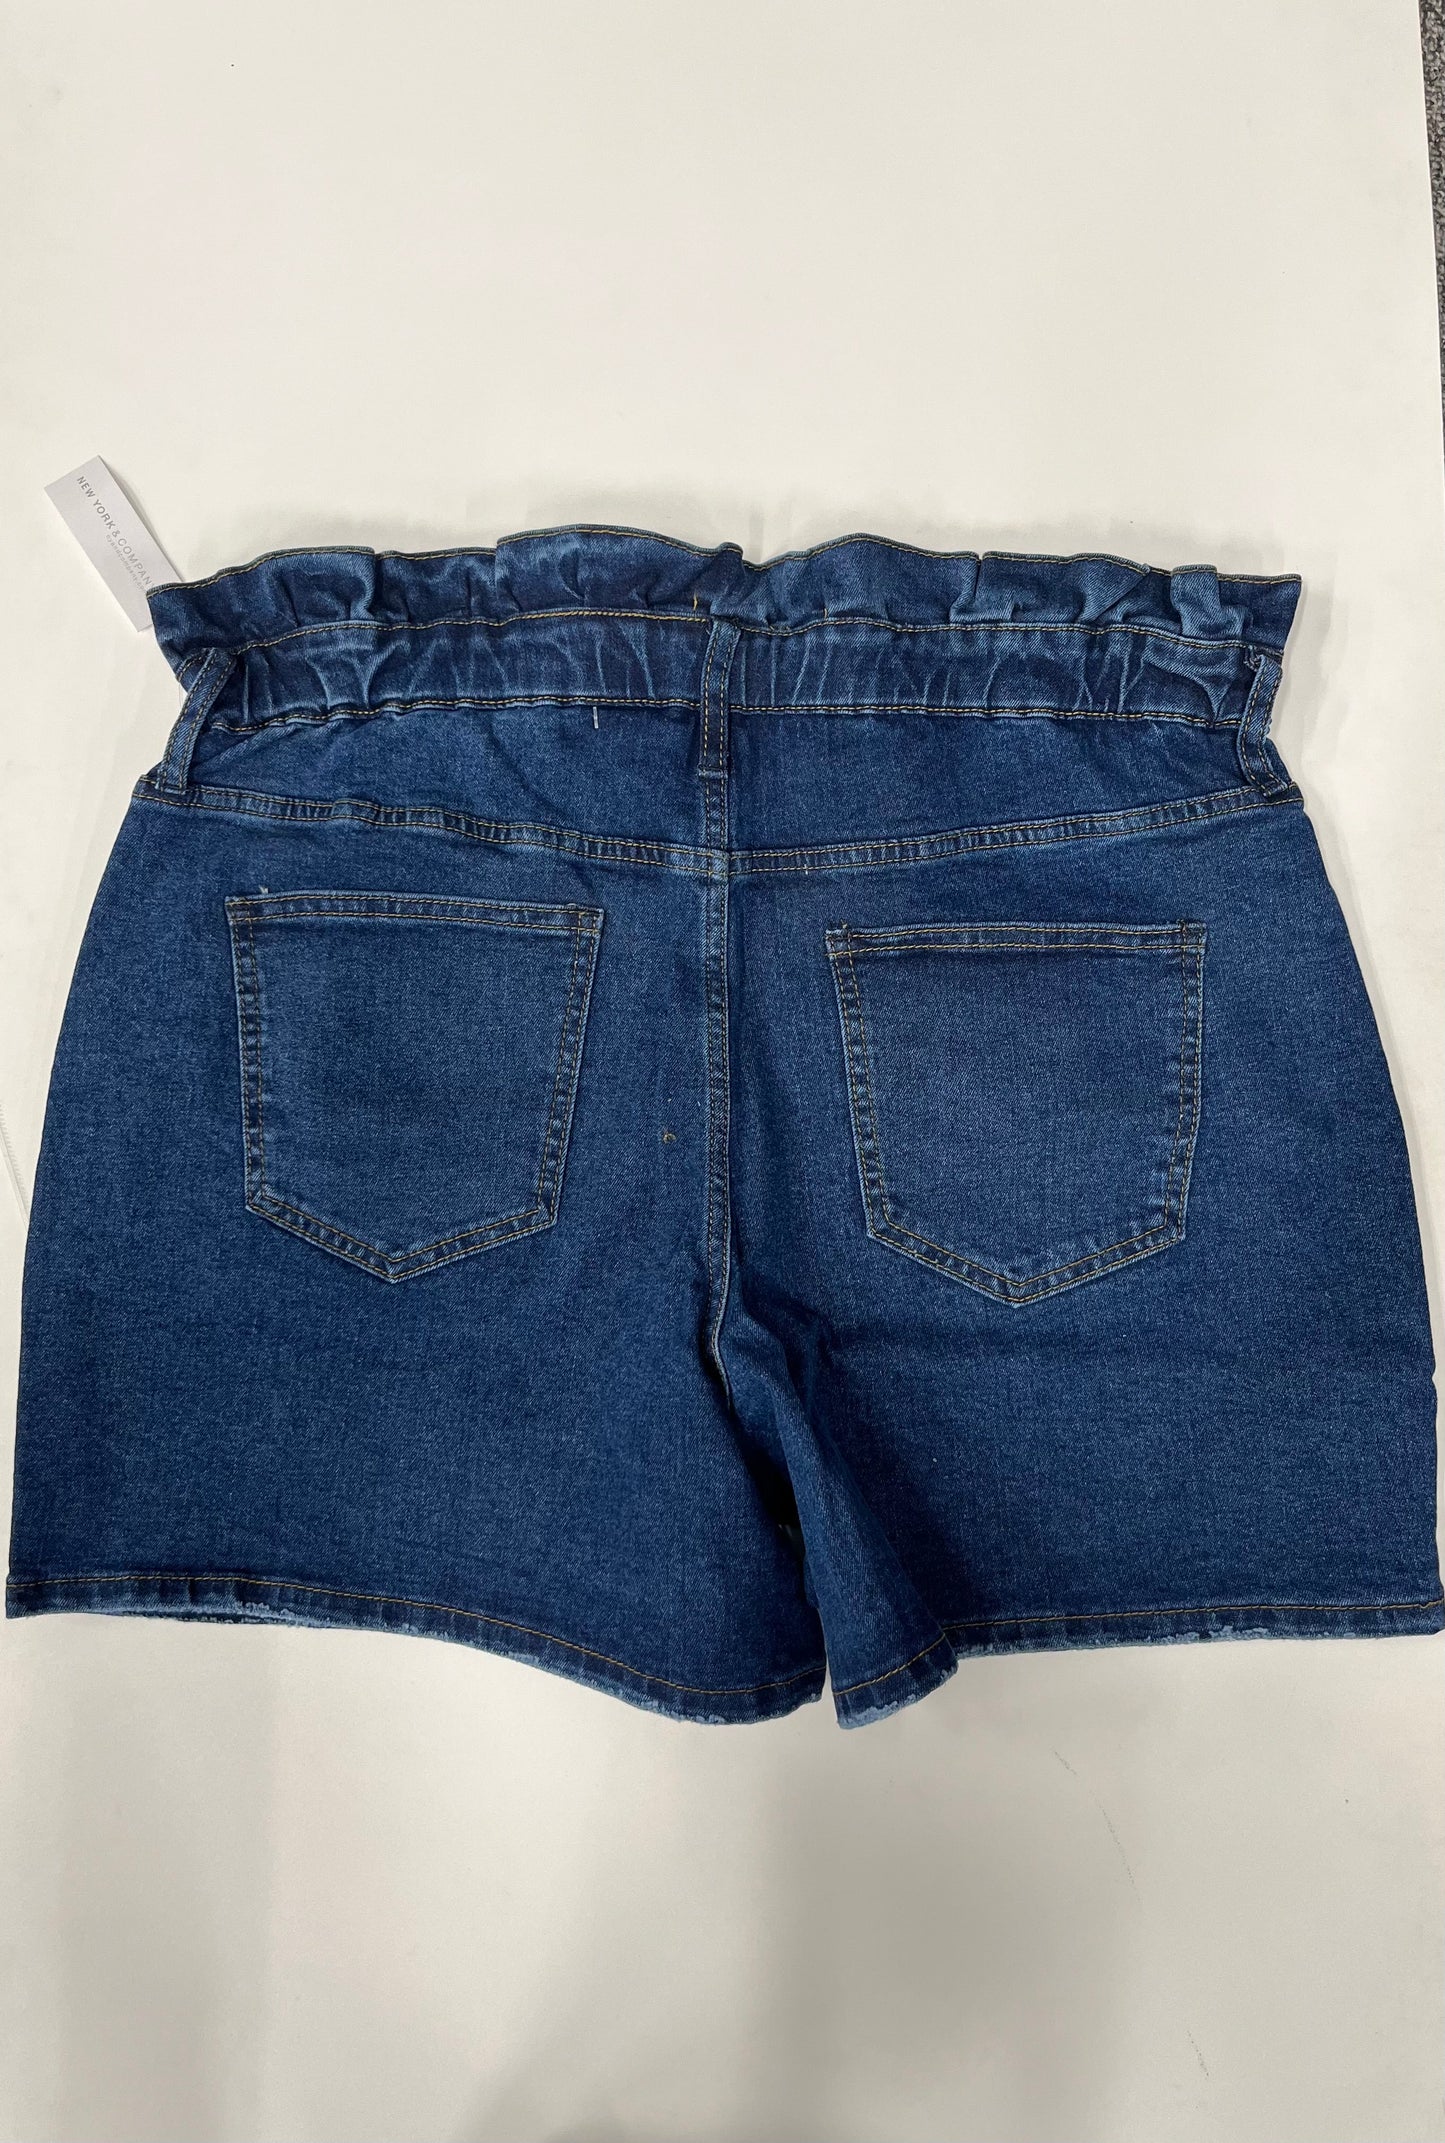 Shorts By New York And Co NWT Size: 14